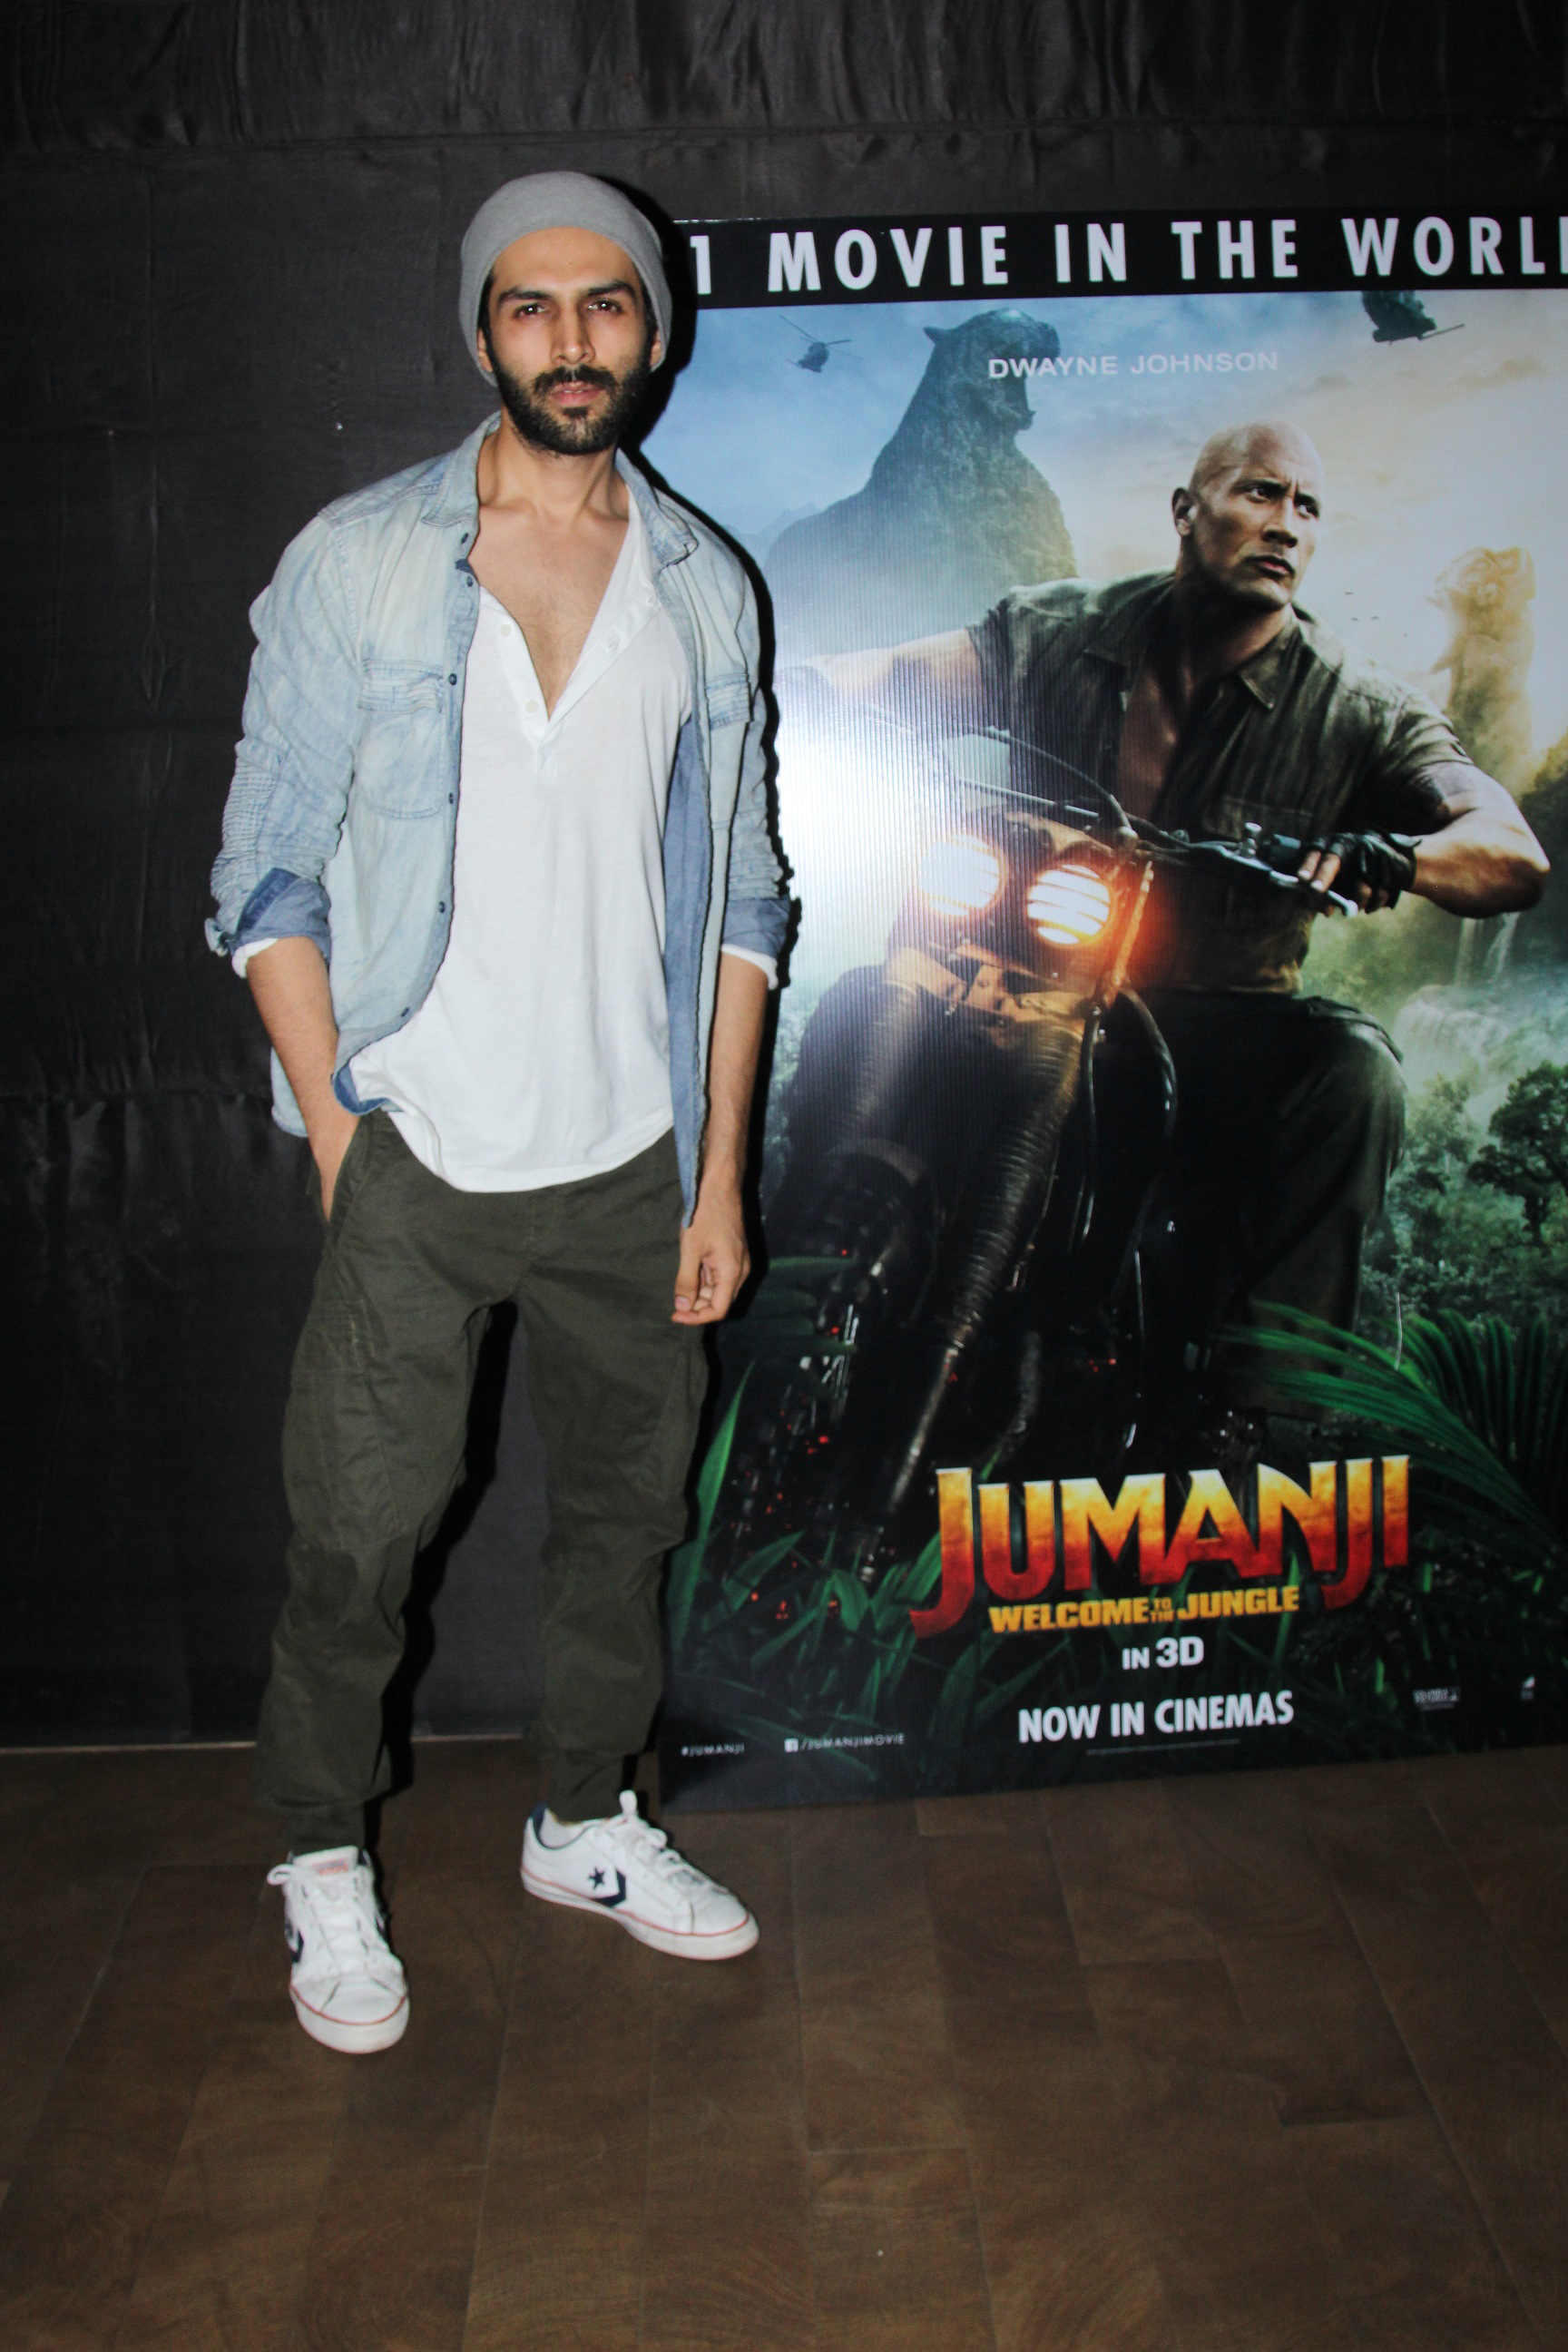 The special screening of 'Jumanji: Welcome to the Jungle'